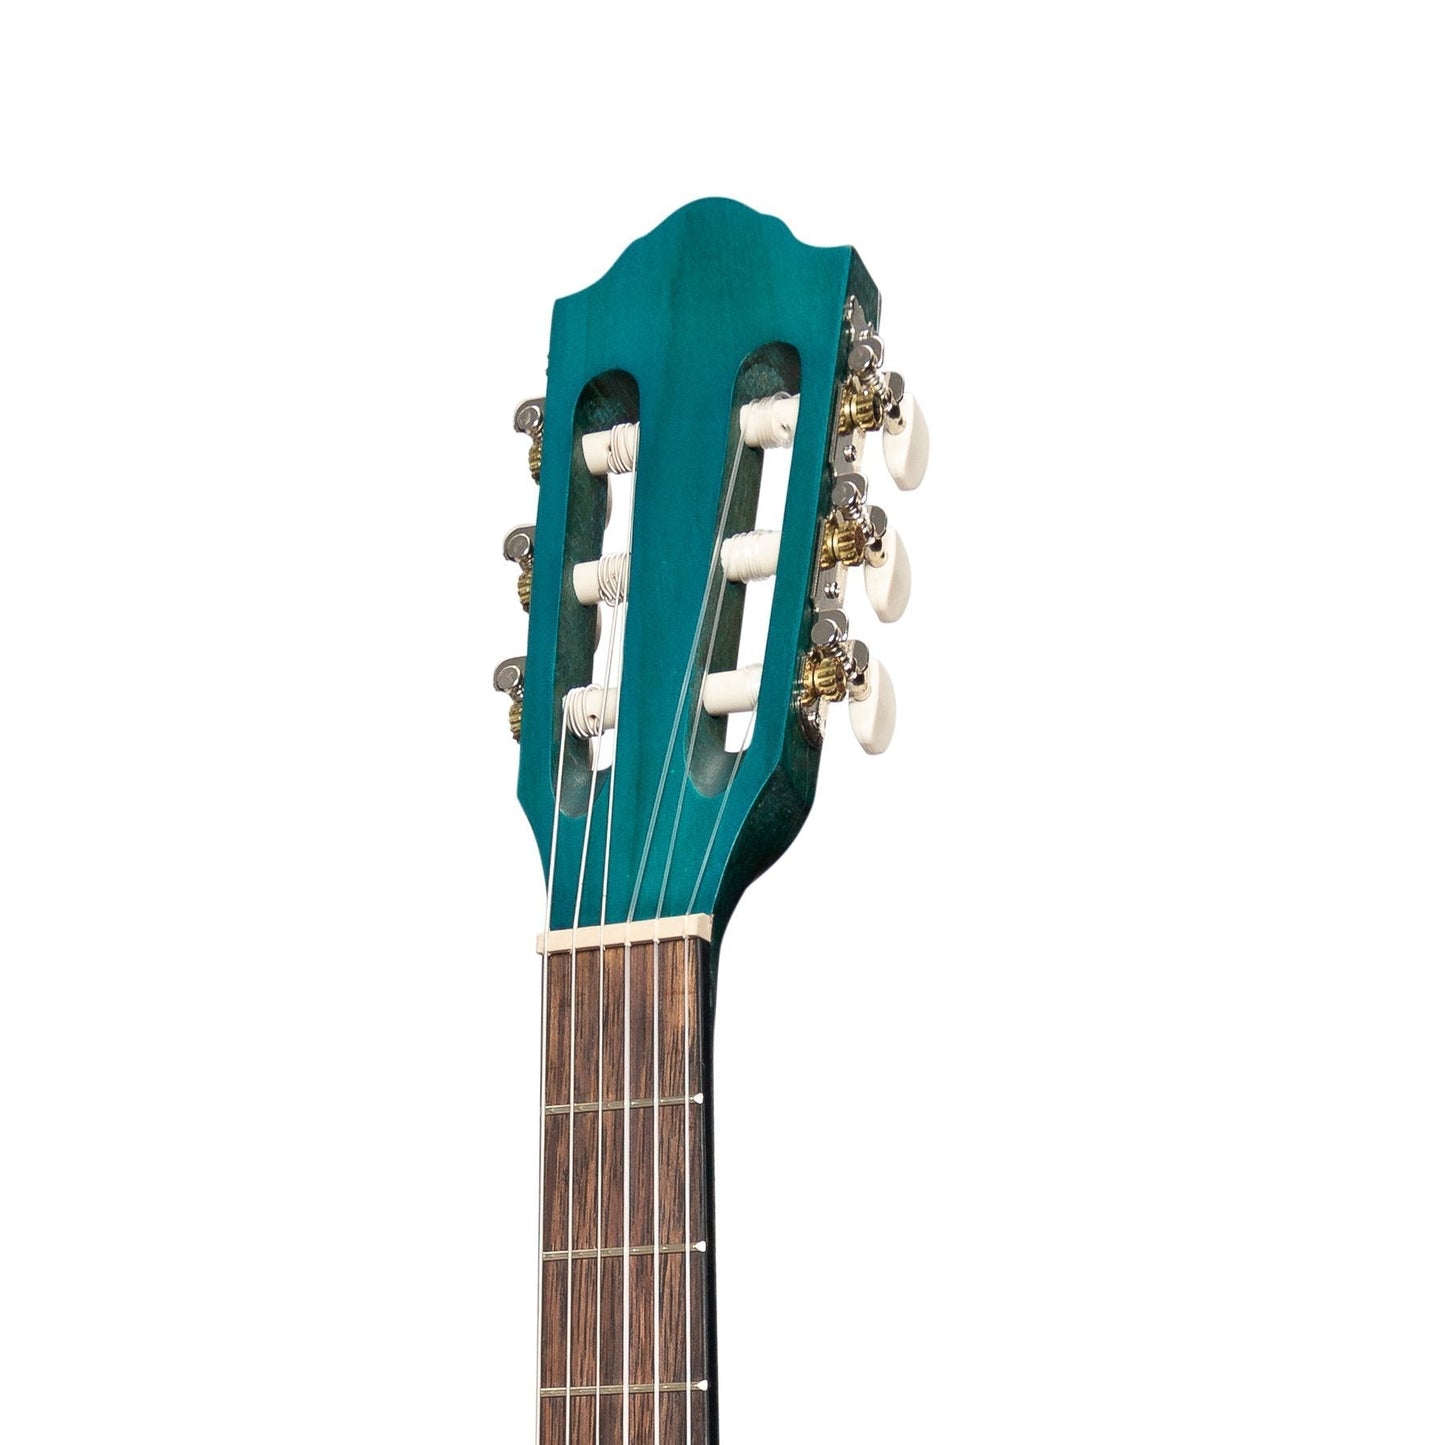 Martinez 'Slim Jim' Full Size Student Classical Guitar with Built In Tuner (Teal Green)